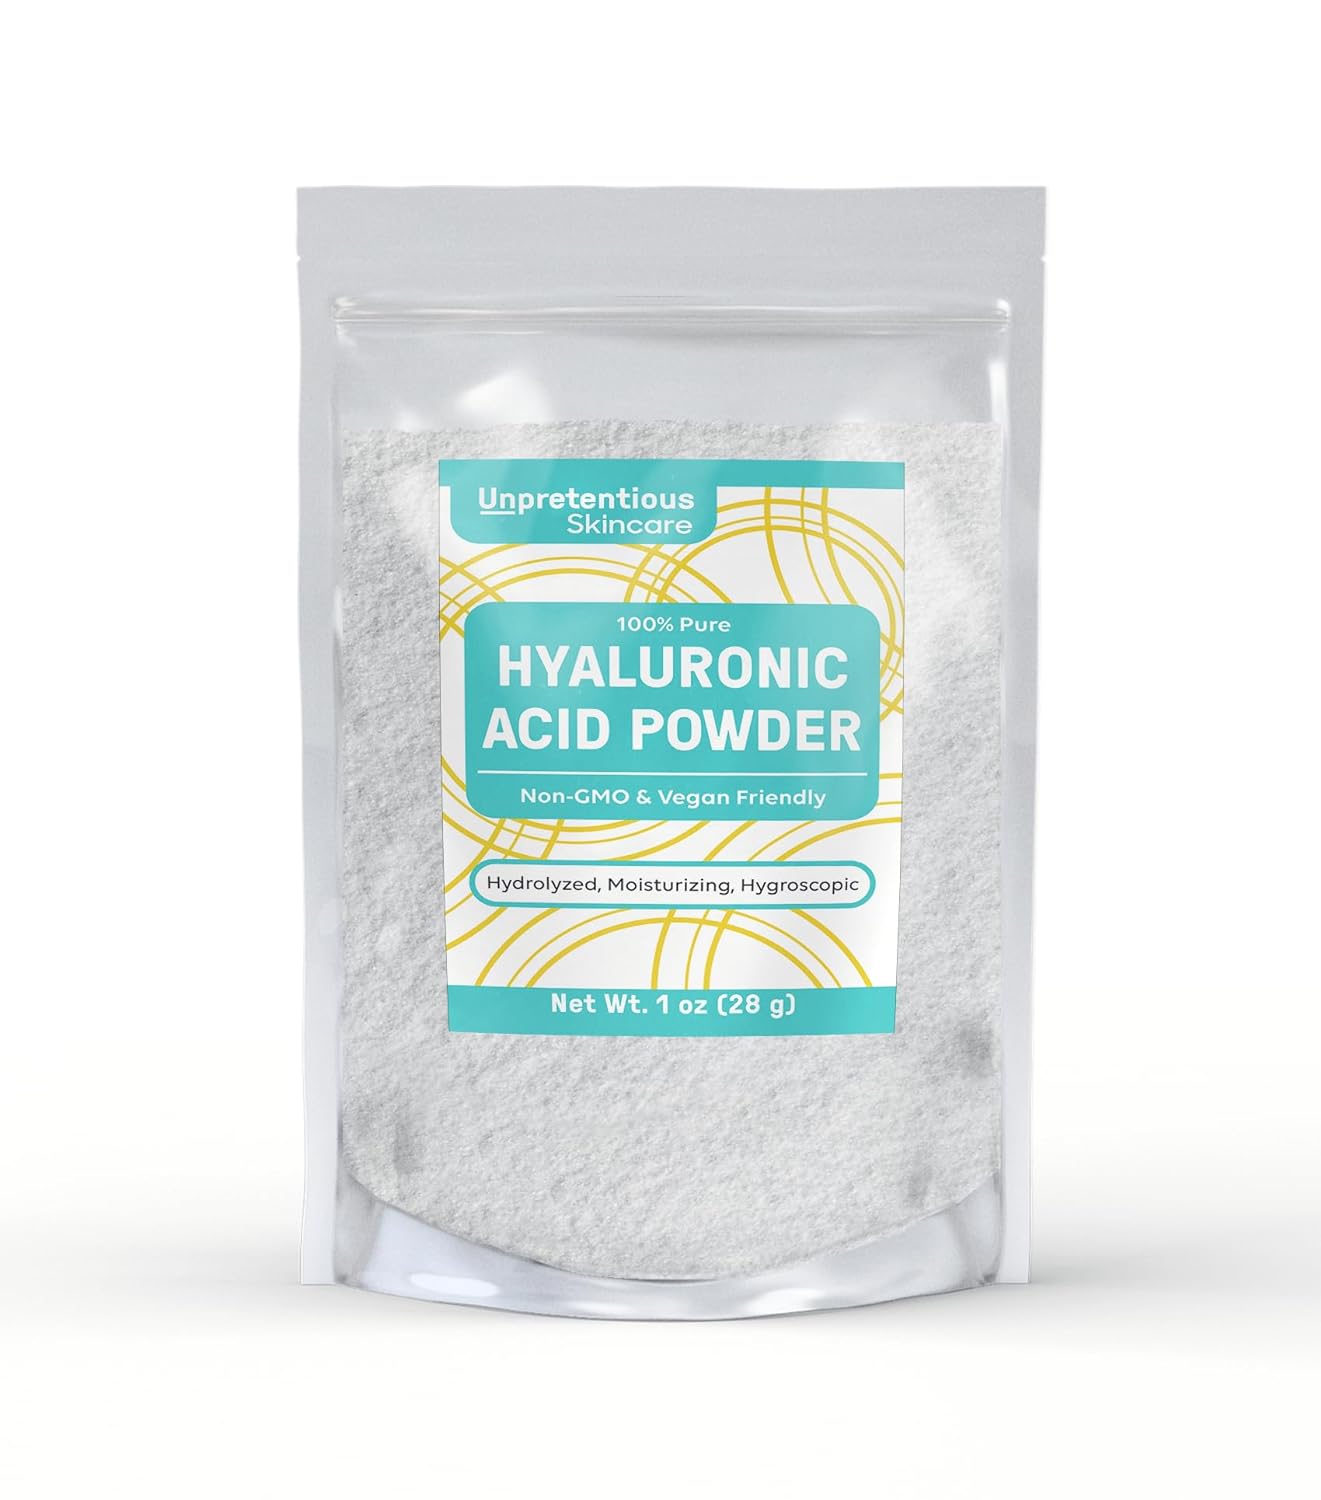 Hyaluronic Acid Powder (1 ) Food & Cosmetic Grade, Clear Resealable Bag